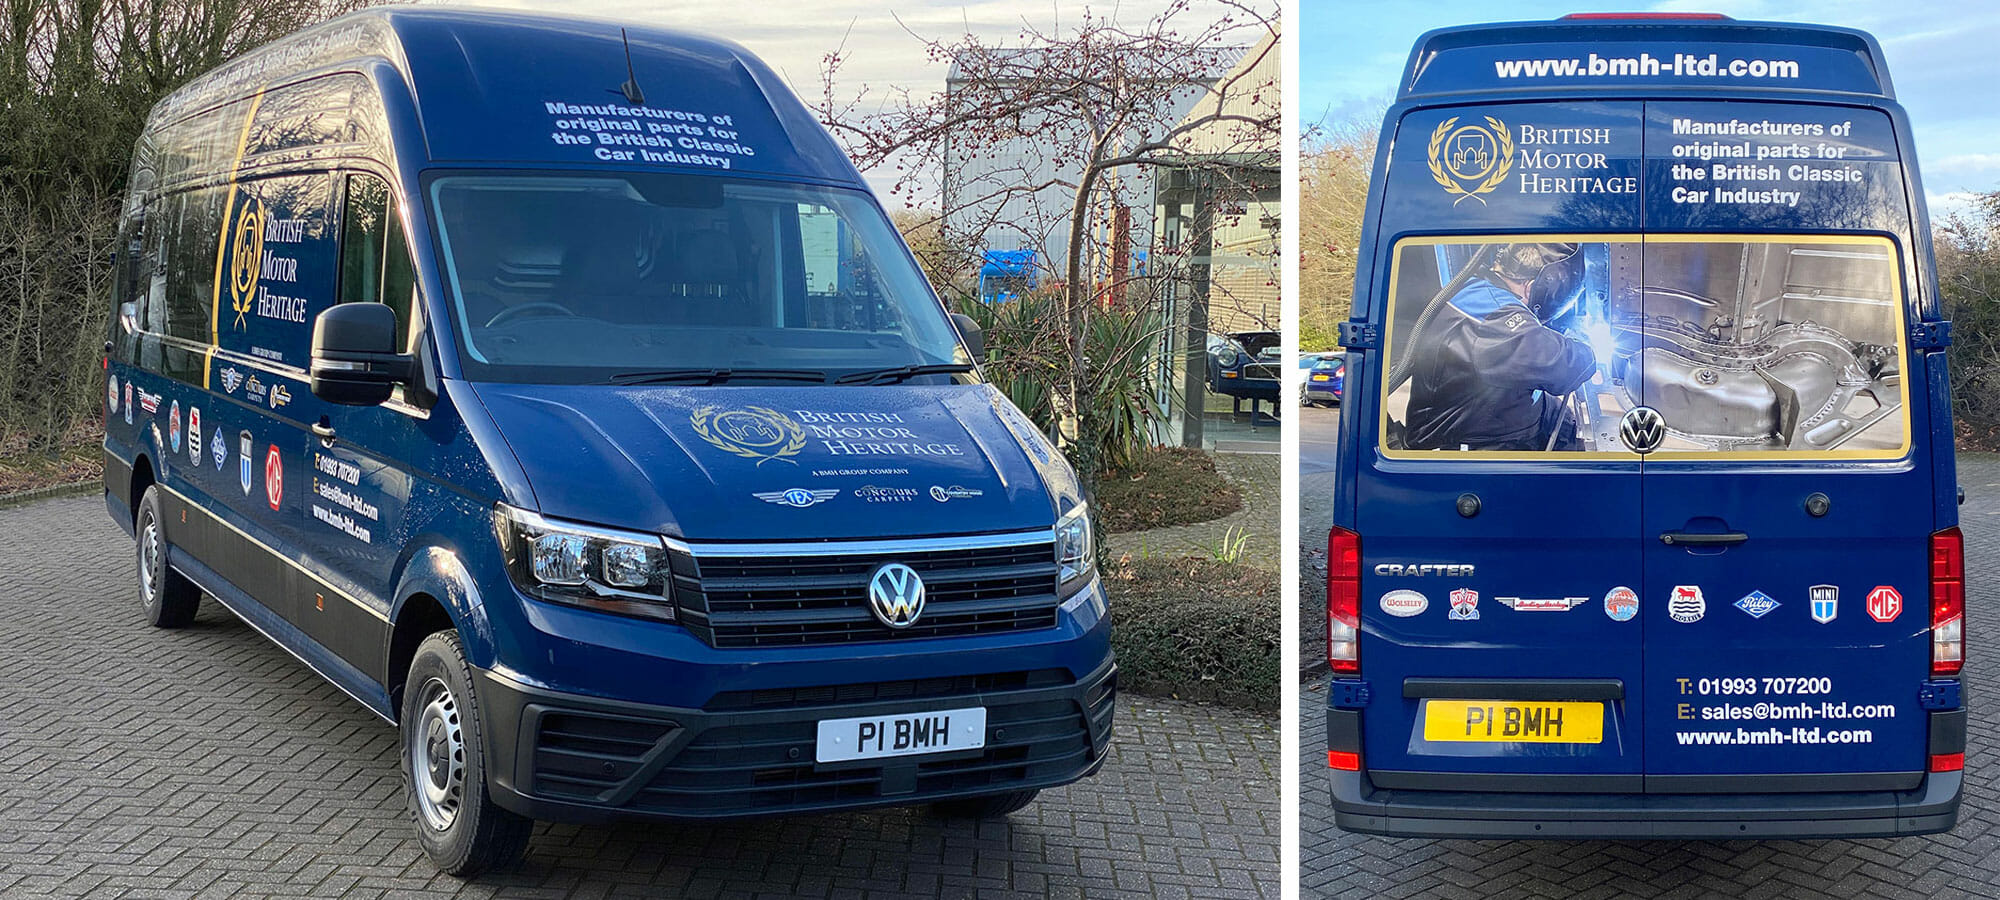 BMH New Van Livery side and Back view